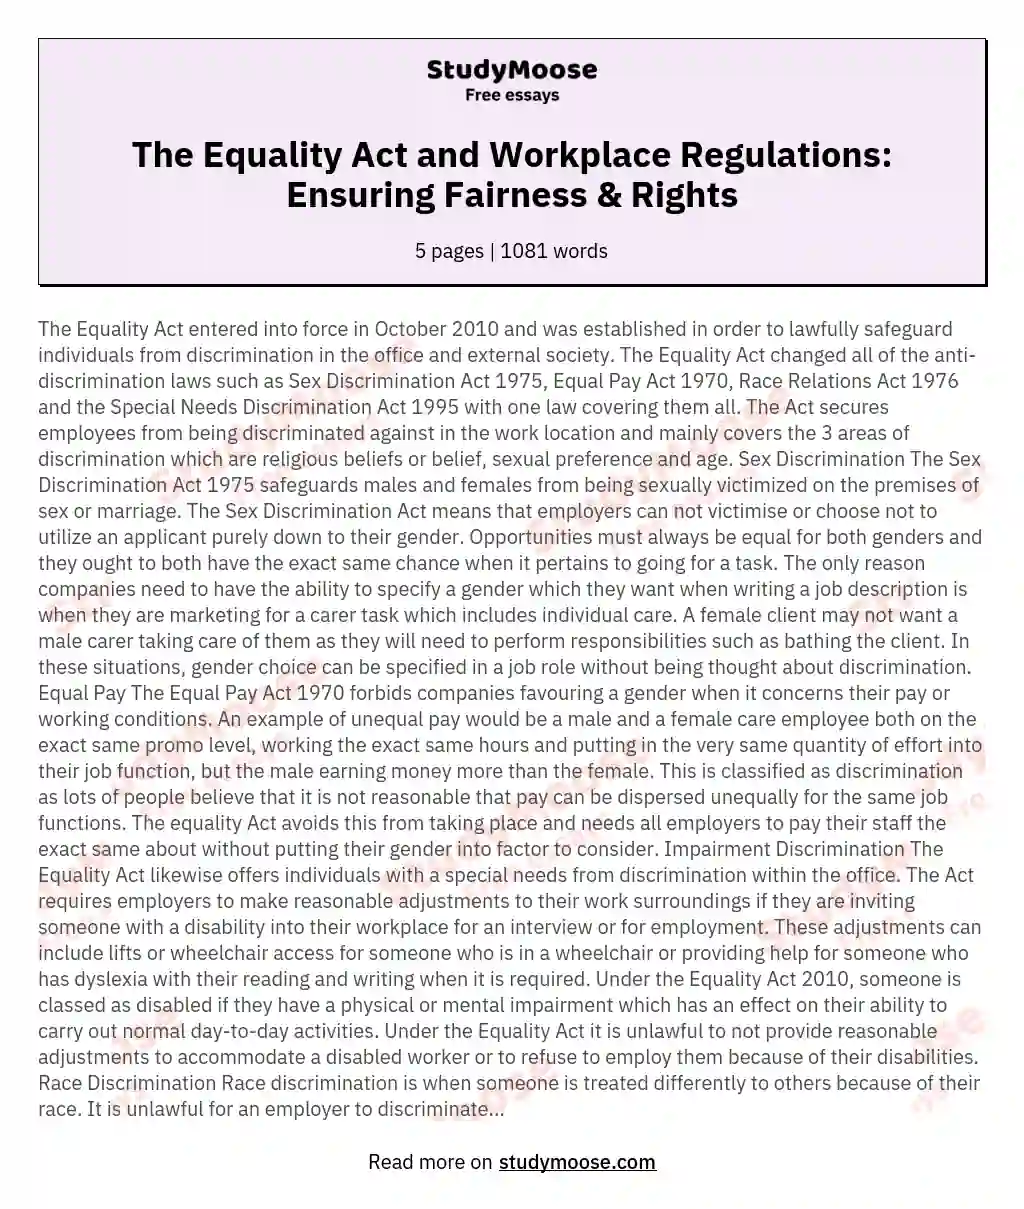 The Equality Act and Workplace Regulations: Ensuring Fairness & Rights essay